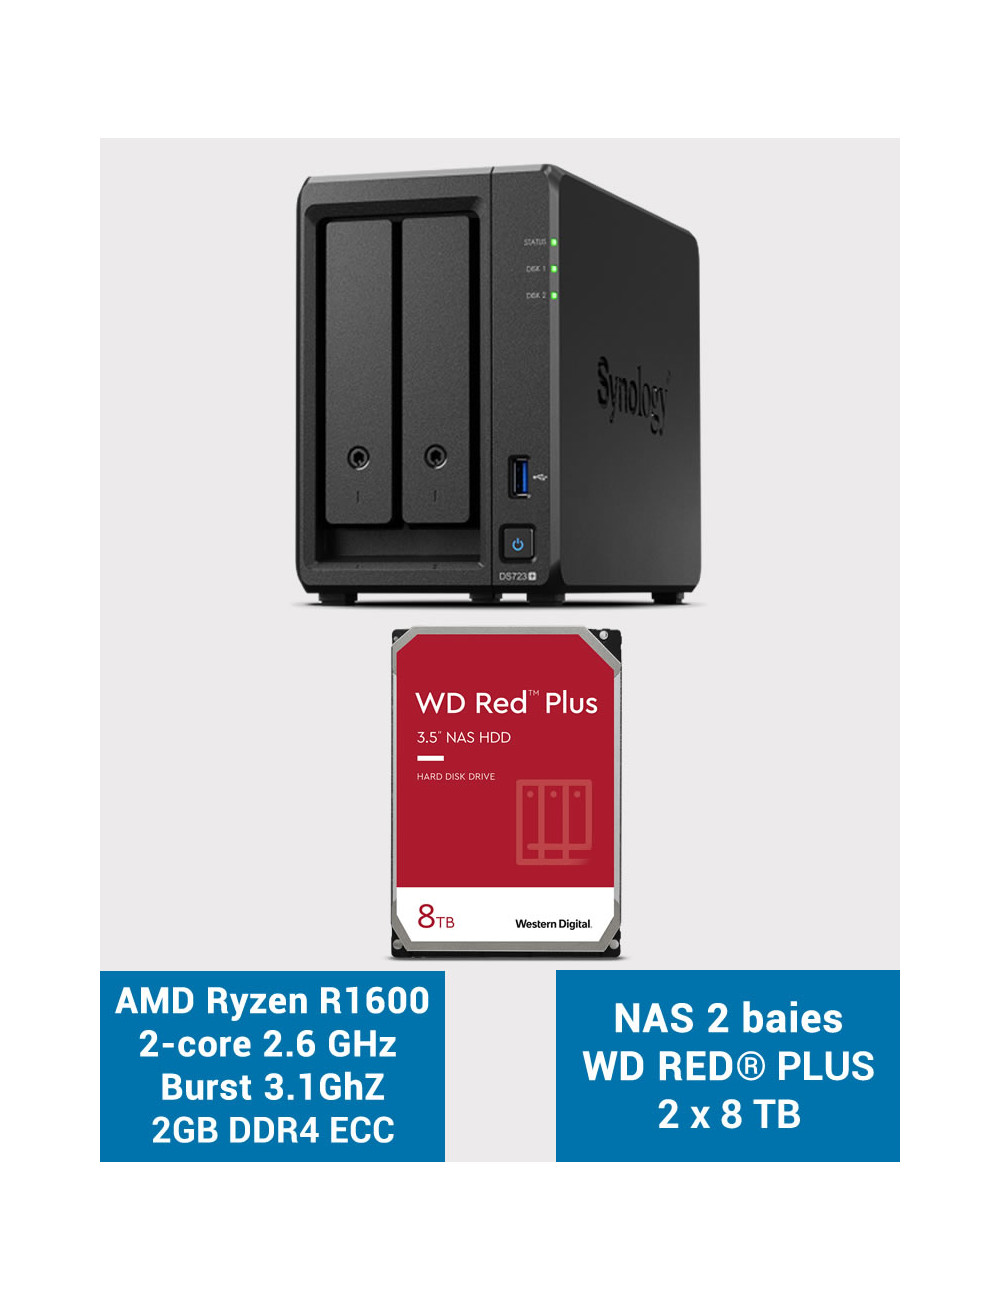 Synology DS723+ Serveur NAS WD RED PLUS 16To (2x8To)